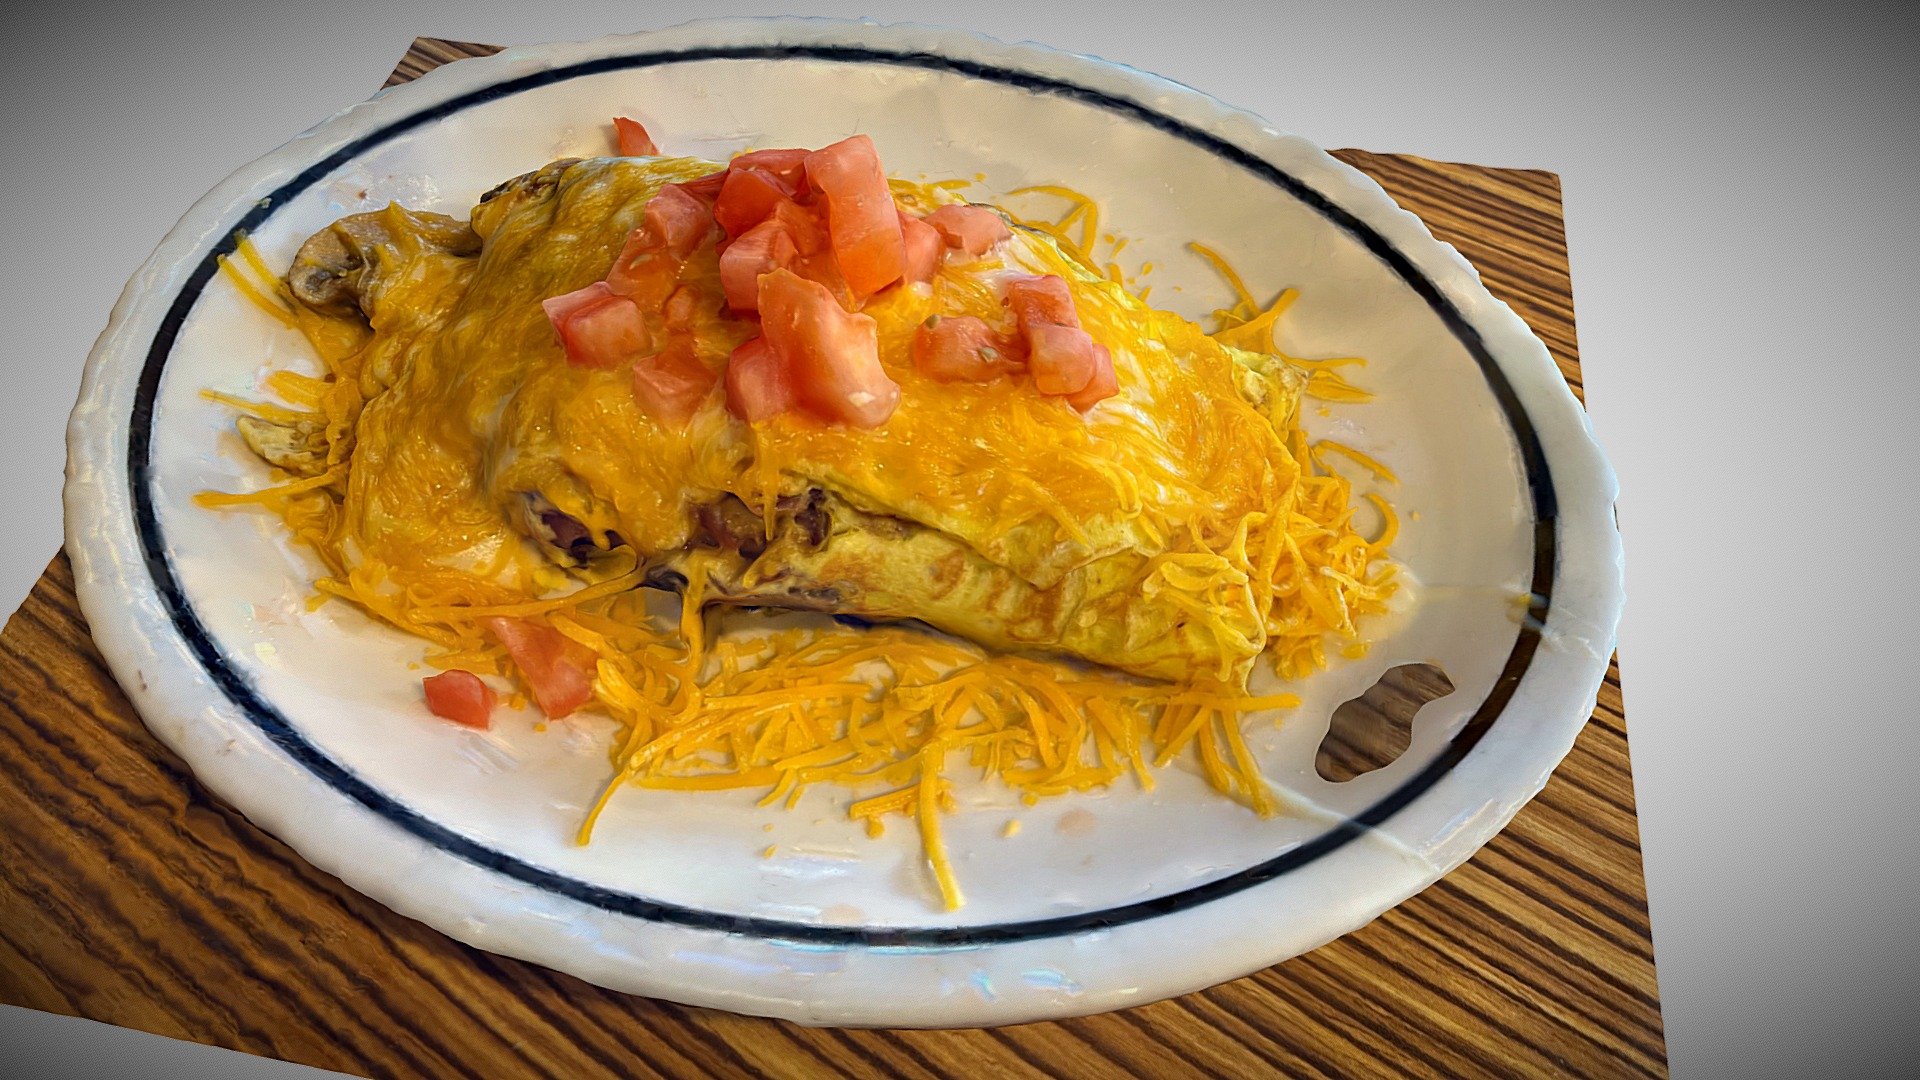 Please visit my link tree to see all my social media links https://linktr.ee/alexharvey

RiVR is a production studio specialising in photorealistic VR training and scanning of real world environments. www.rivr.uk to view all our products

thanks and hope you like the photogrammetry models .

photogrammetry - IHOP omelette Las Vegas - Buy Royalty Free 3D model by Alex Tench (@alex.harvey) 3d model